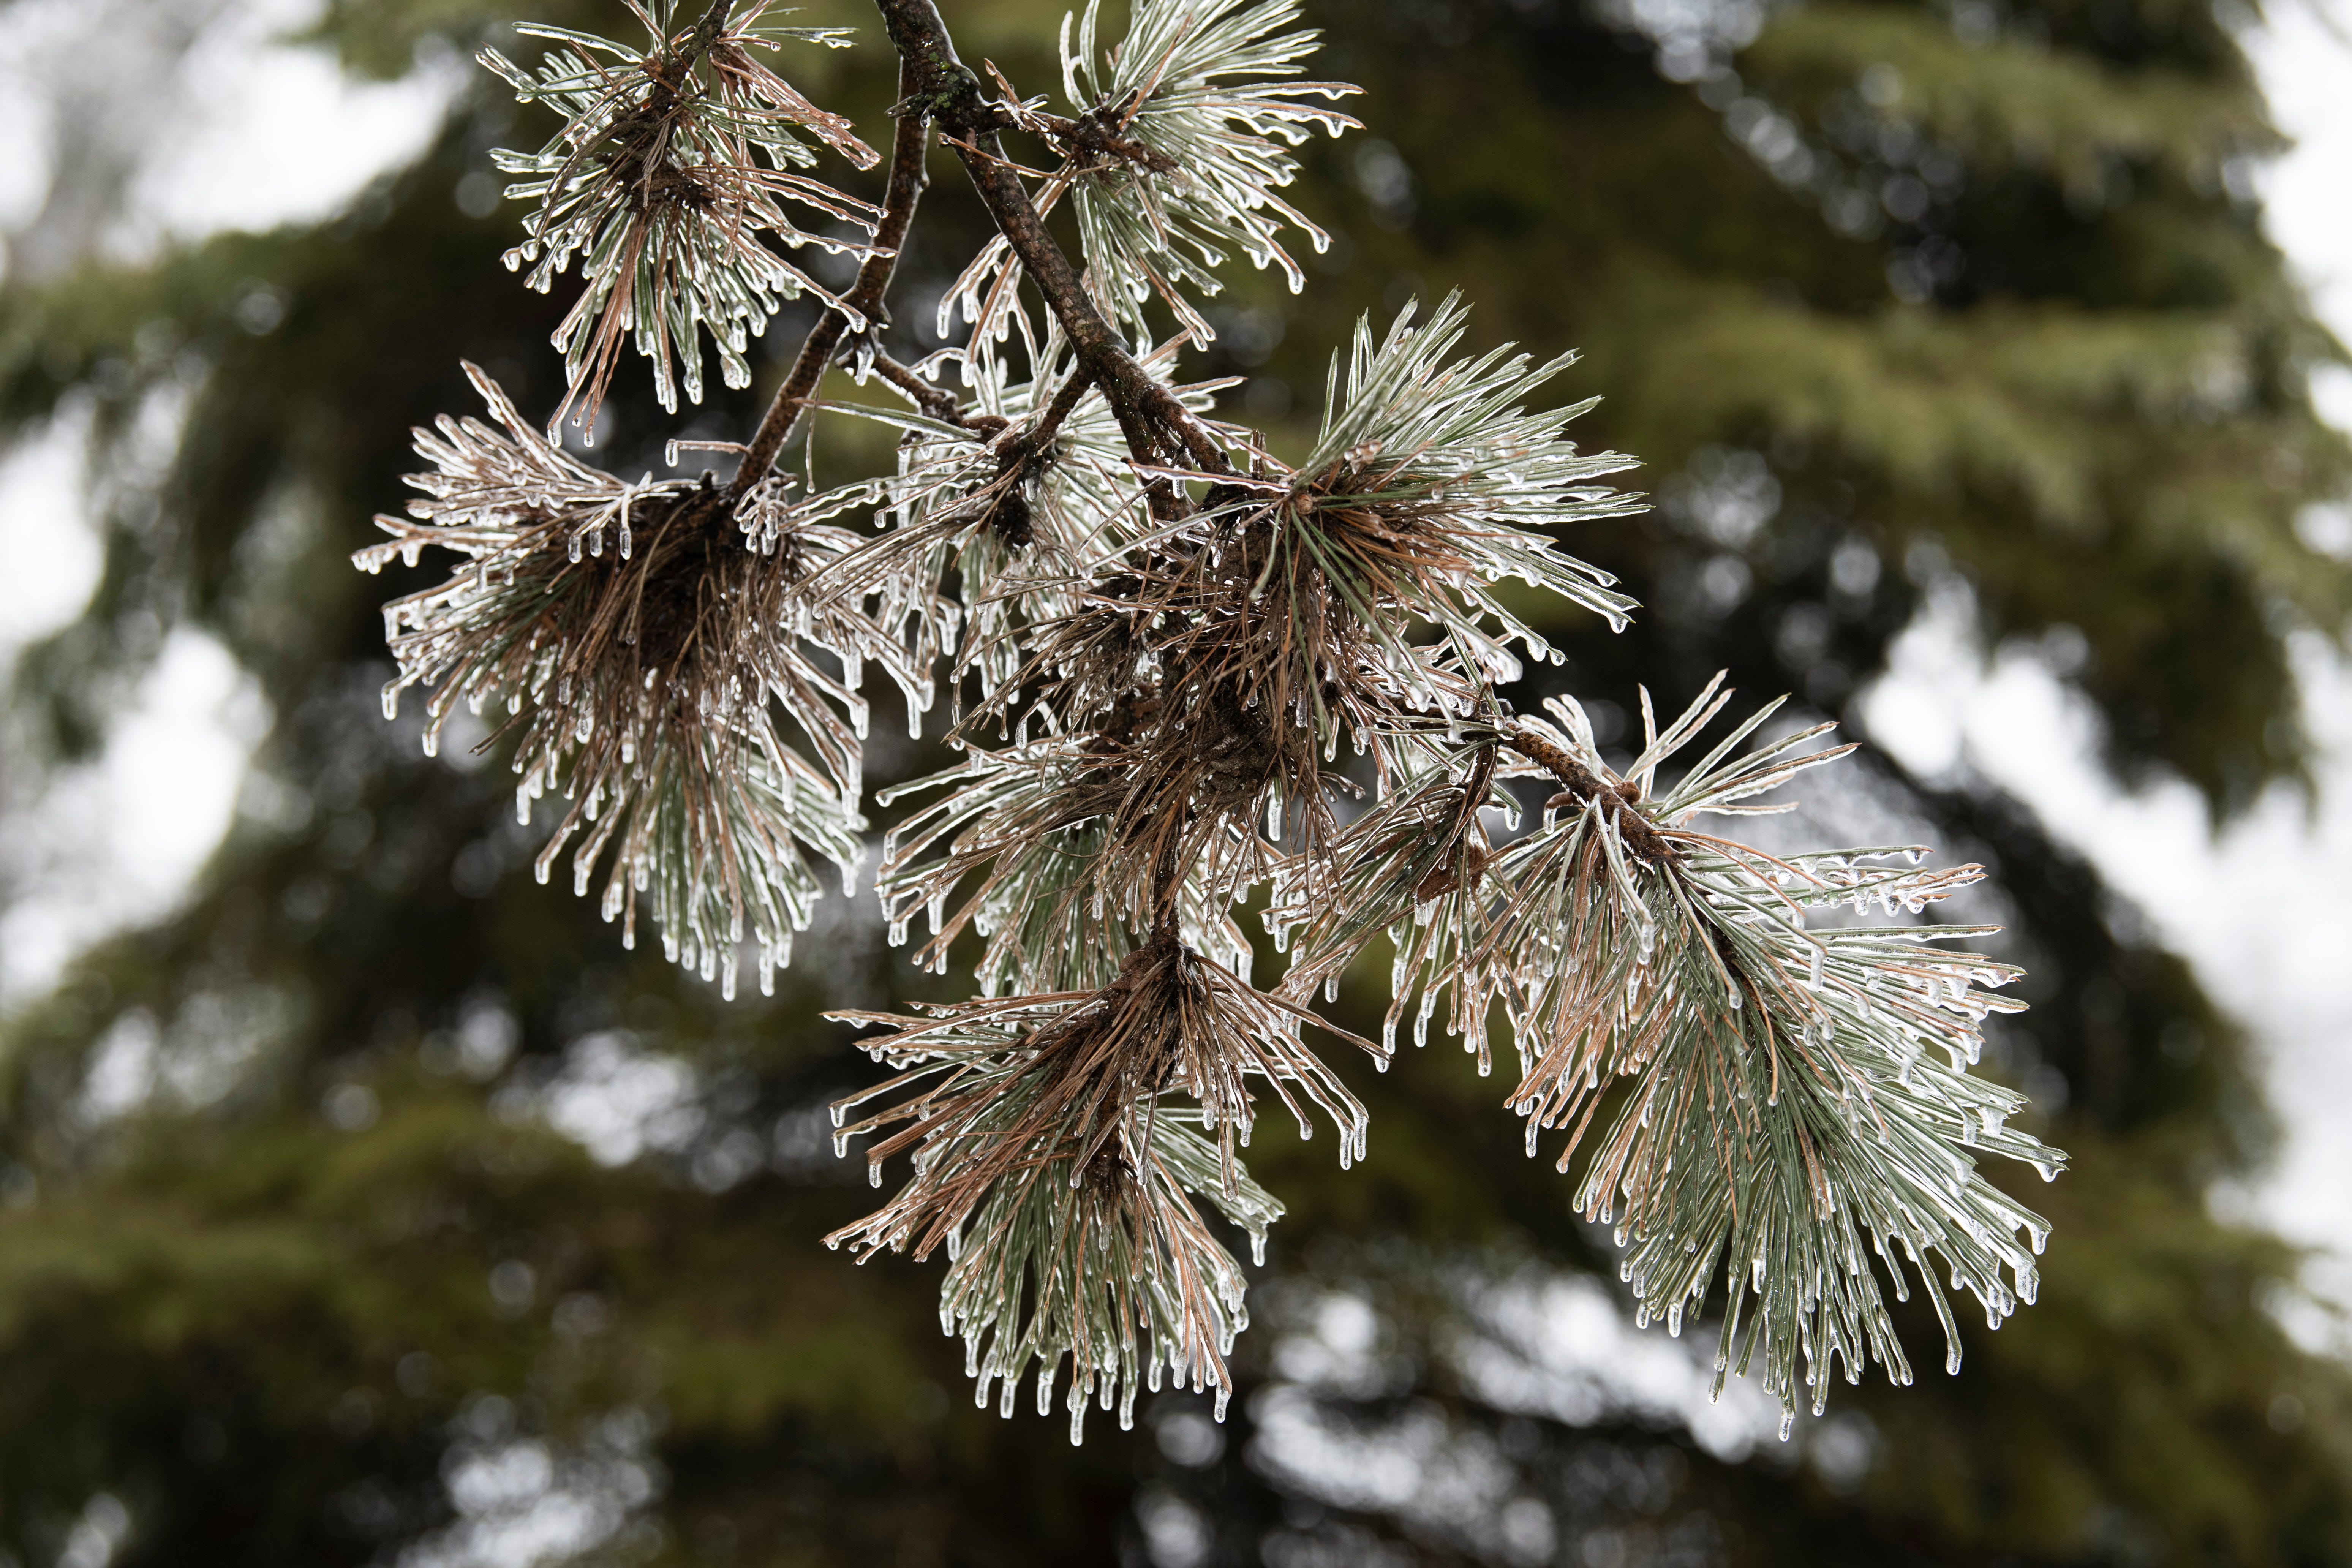 Ice clings to the needles of an evergreen tree in Grosse Pointe Woods on the morning of Thursday, February 23, 2023 after freezing rain coated Metro Detroit communities over night.